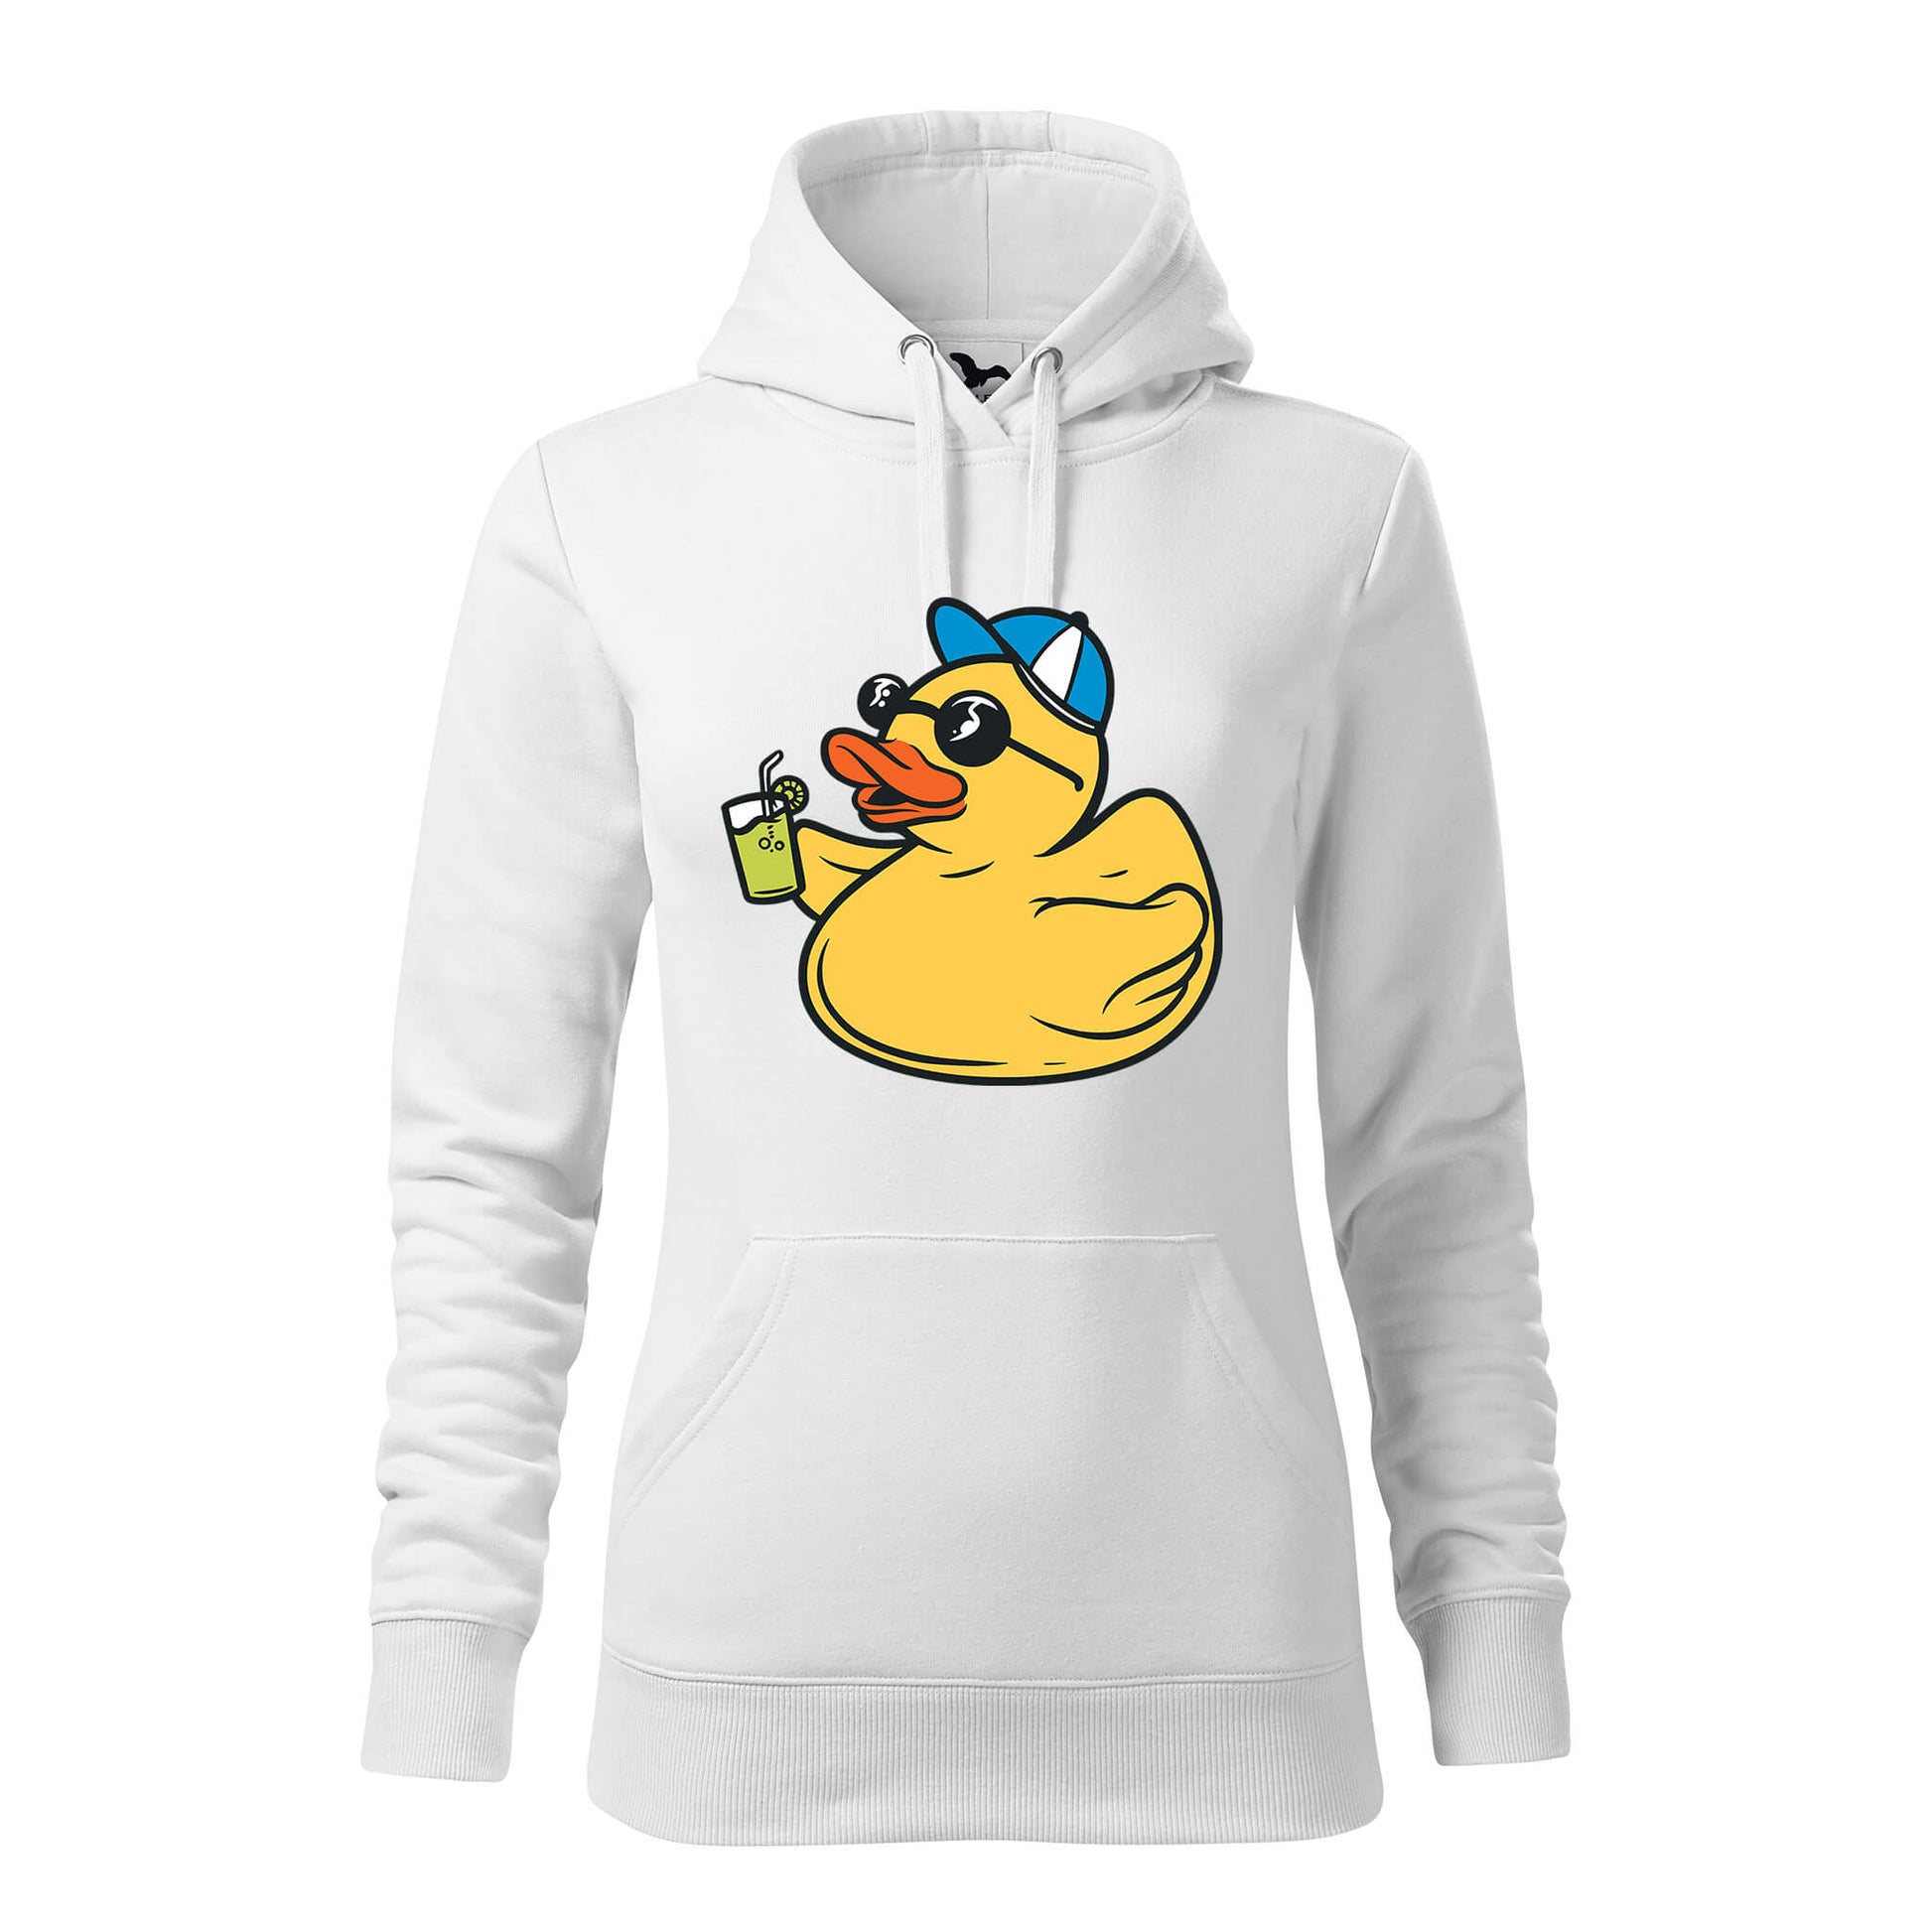 Party rubber duck hoodie - rvdesignprint